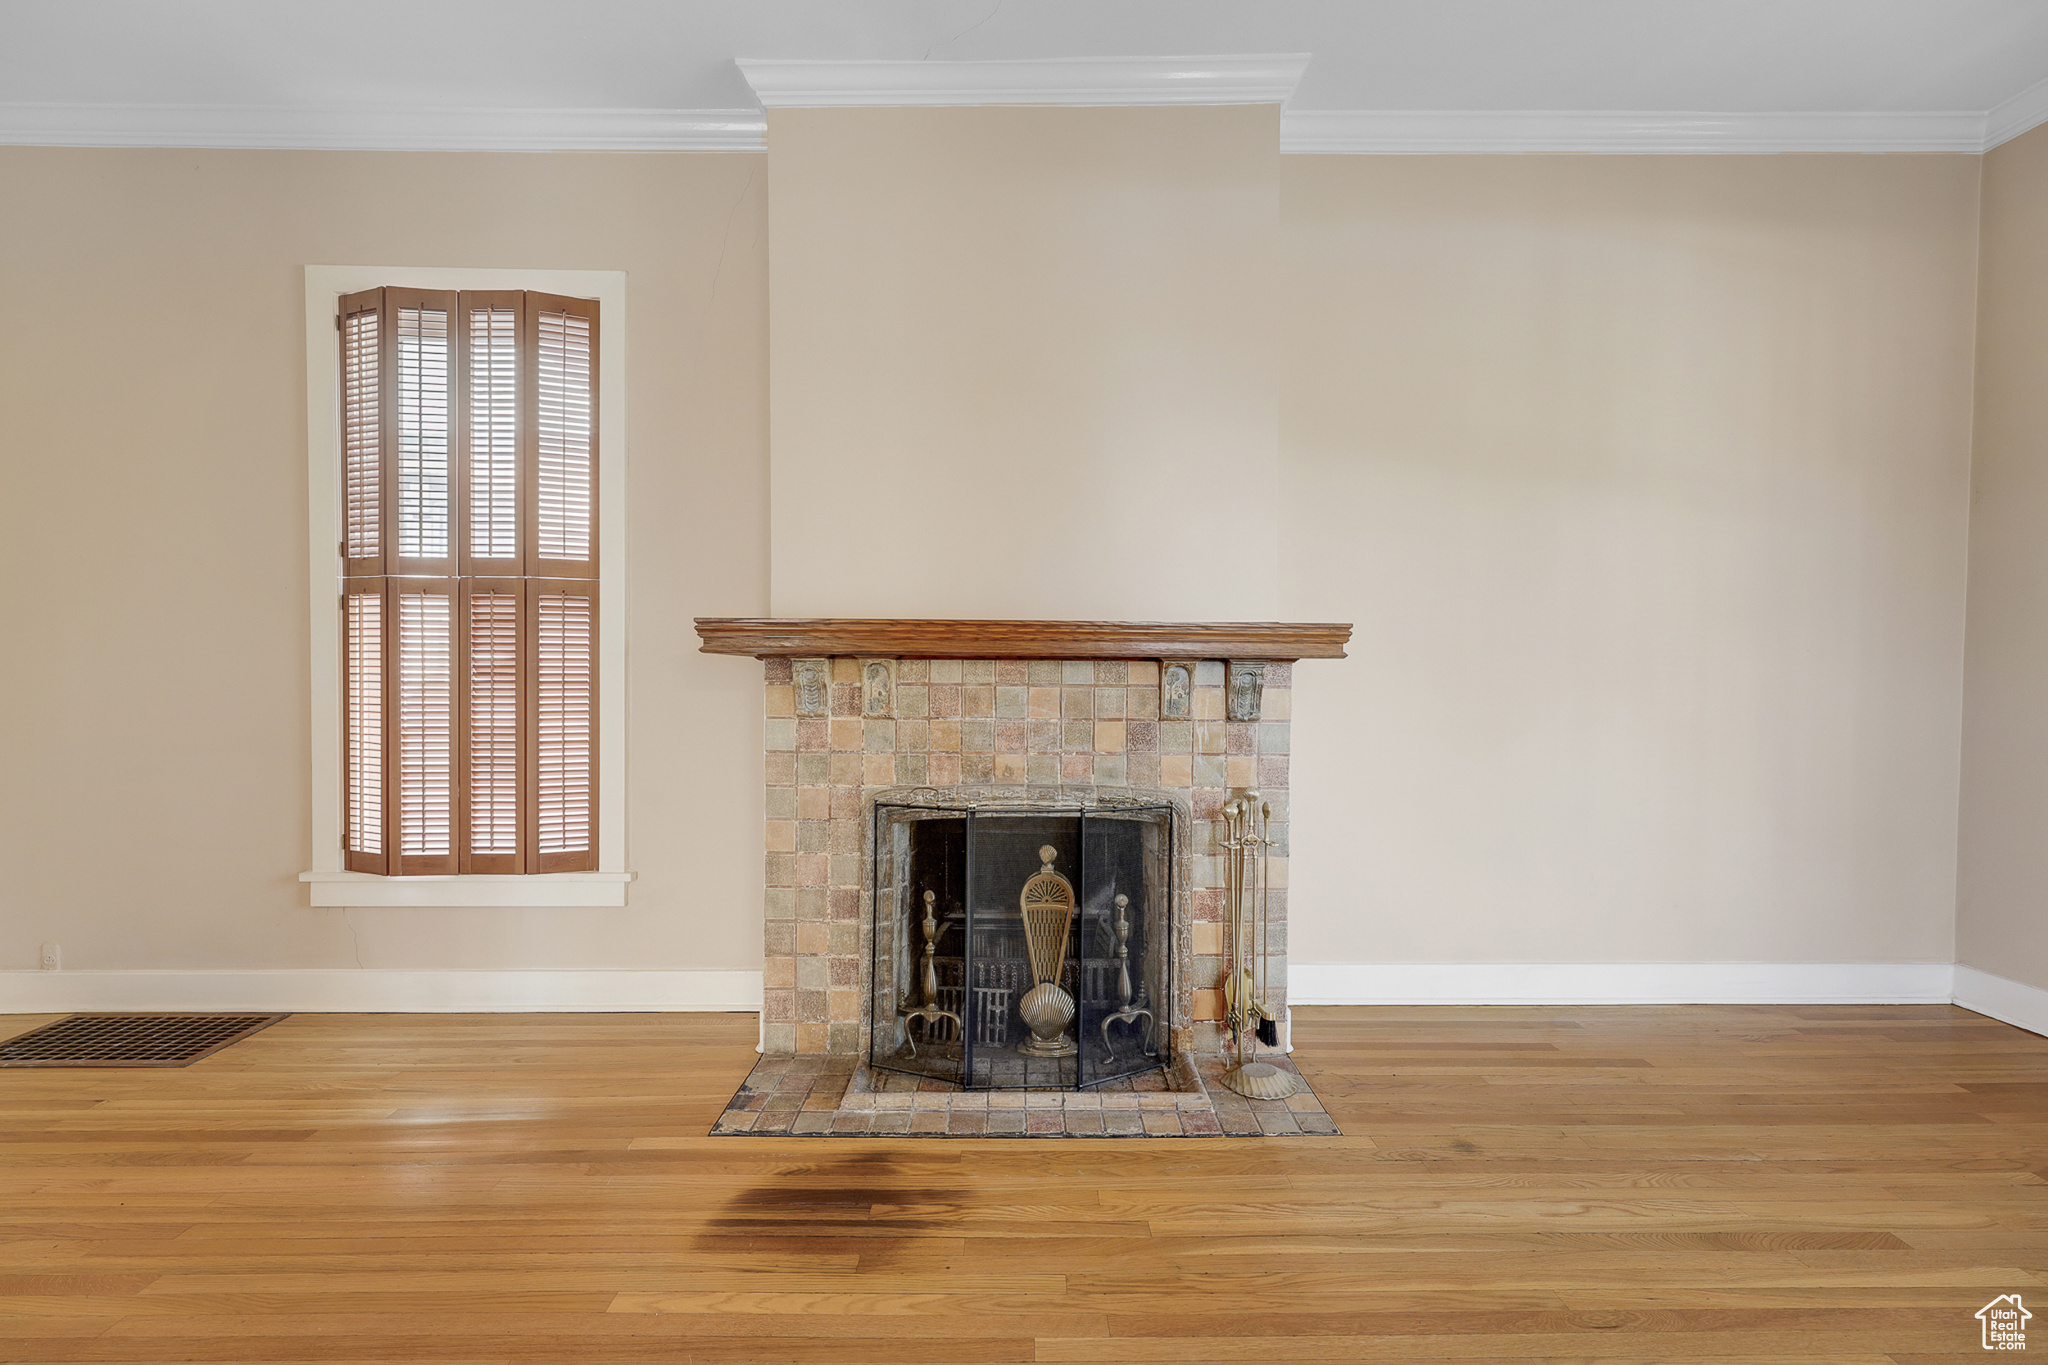 Living room with ornamental molding and hardwood flooring with fireplace